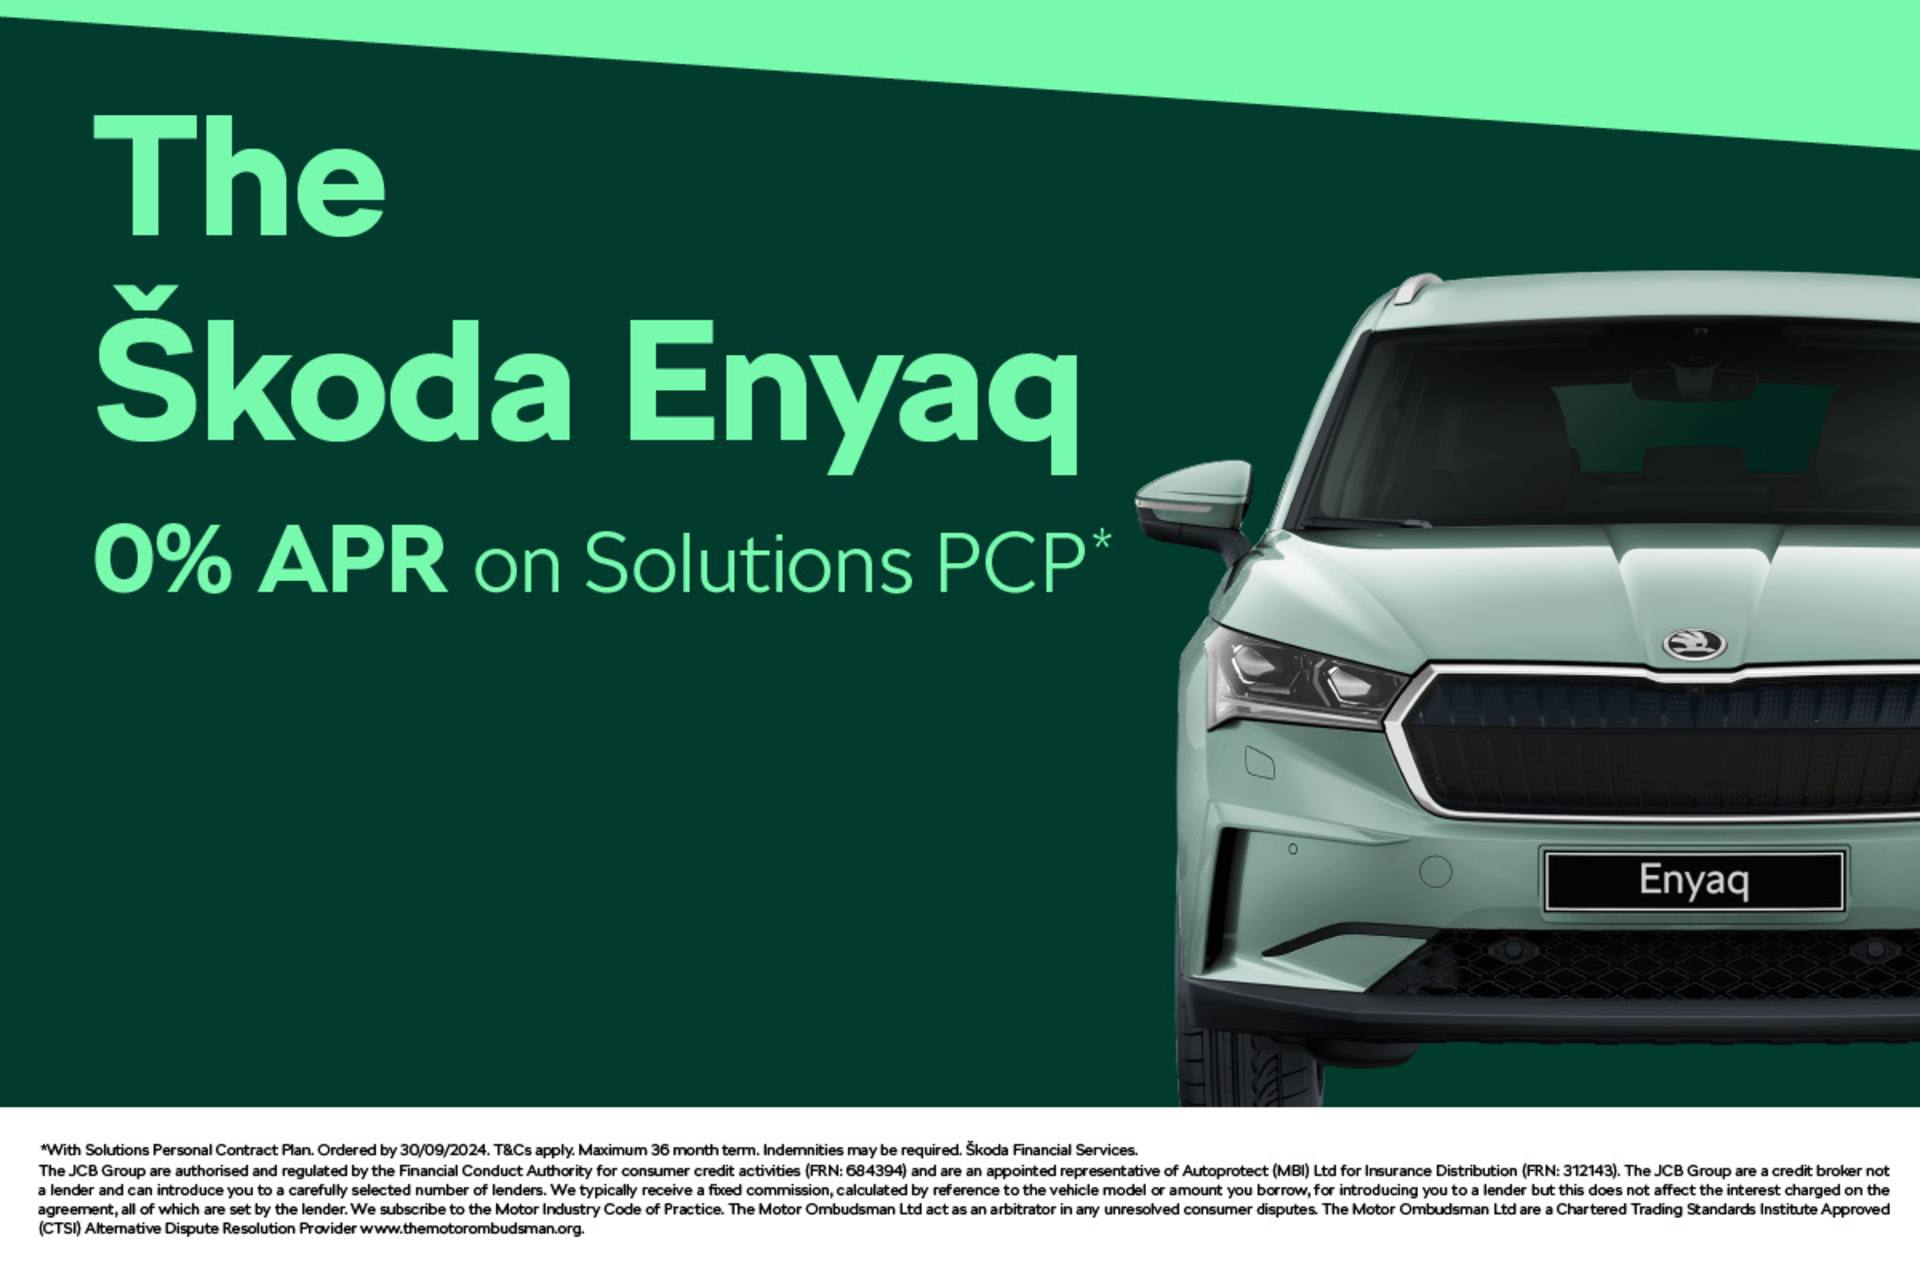 0% APR on Solutions PCP